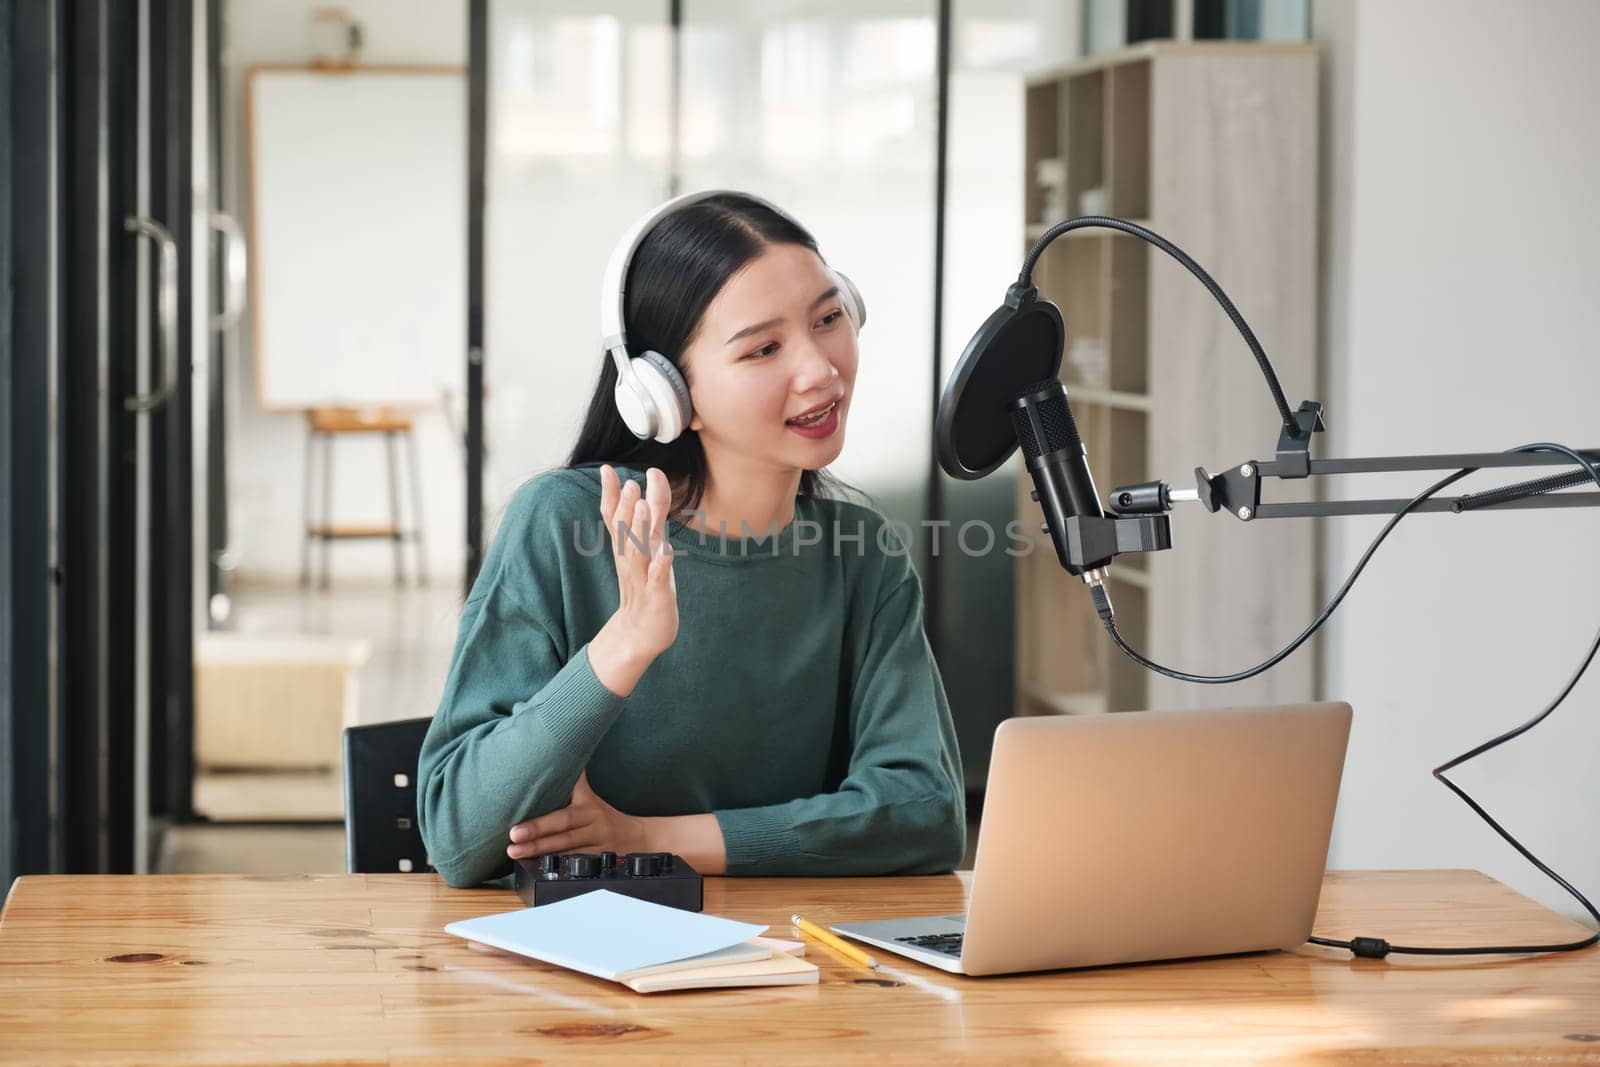 A woman wearing headphones is talking into a microphone. She is sitting at a desk with a laptop and a stack of papers. The scene suggests that she is working on a project or recording a podcast